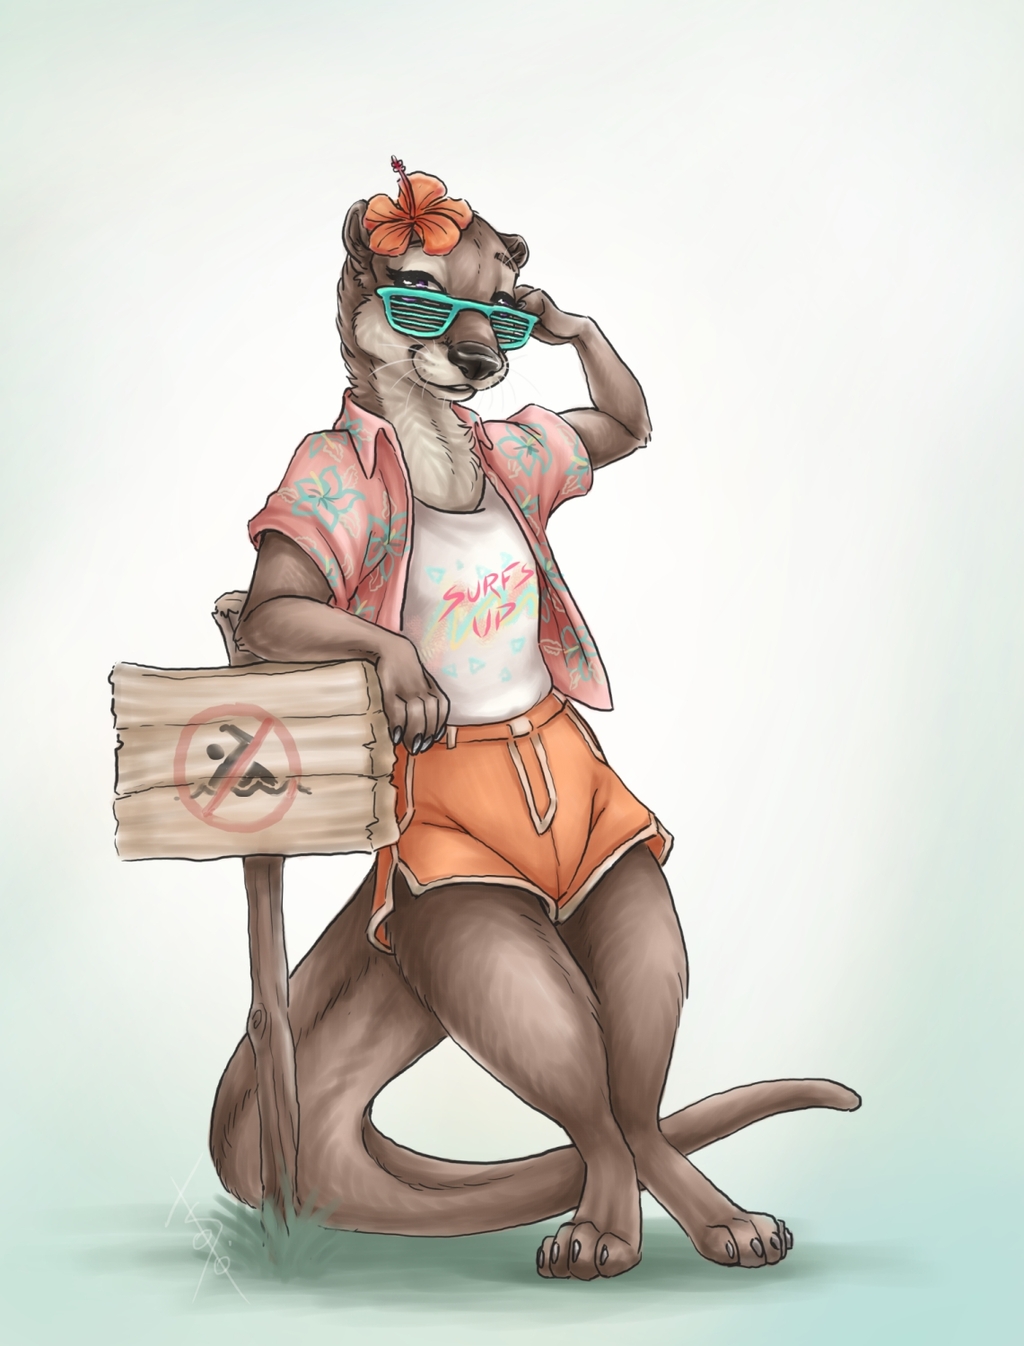 Most recent image: Totally Tubular Otter